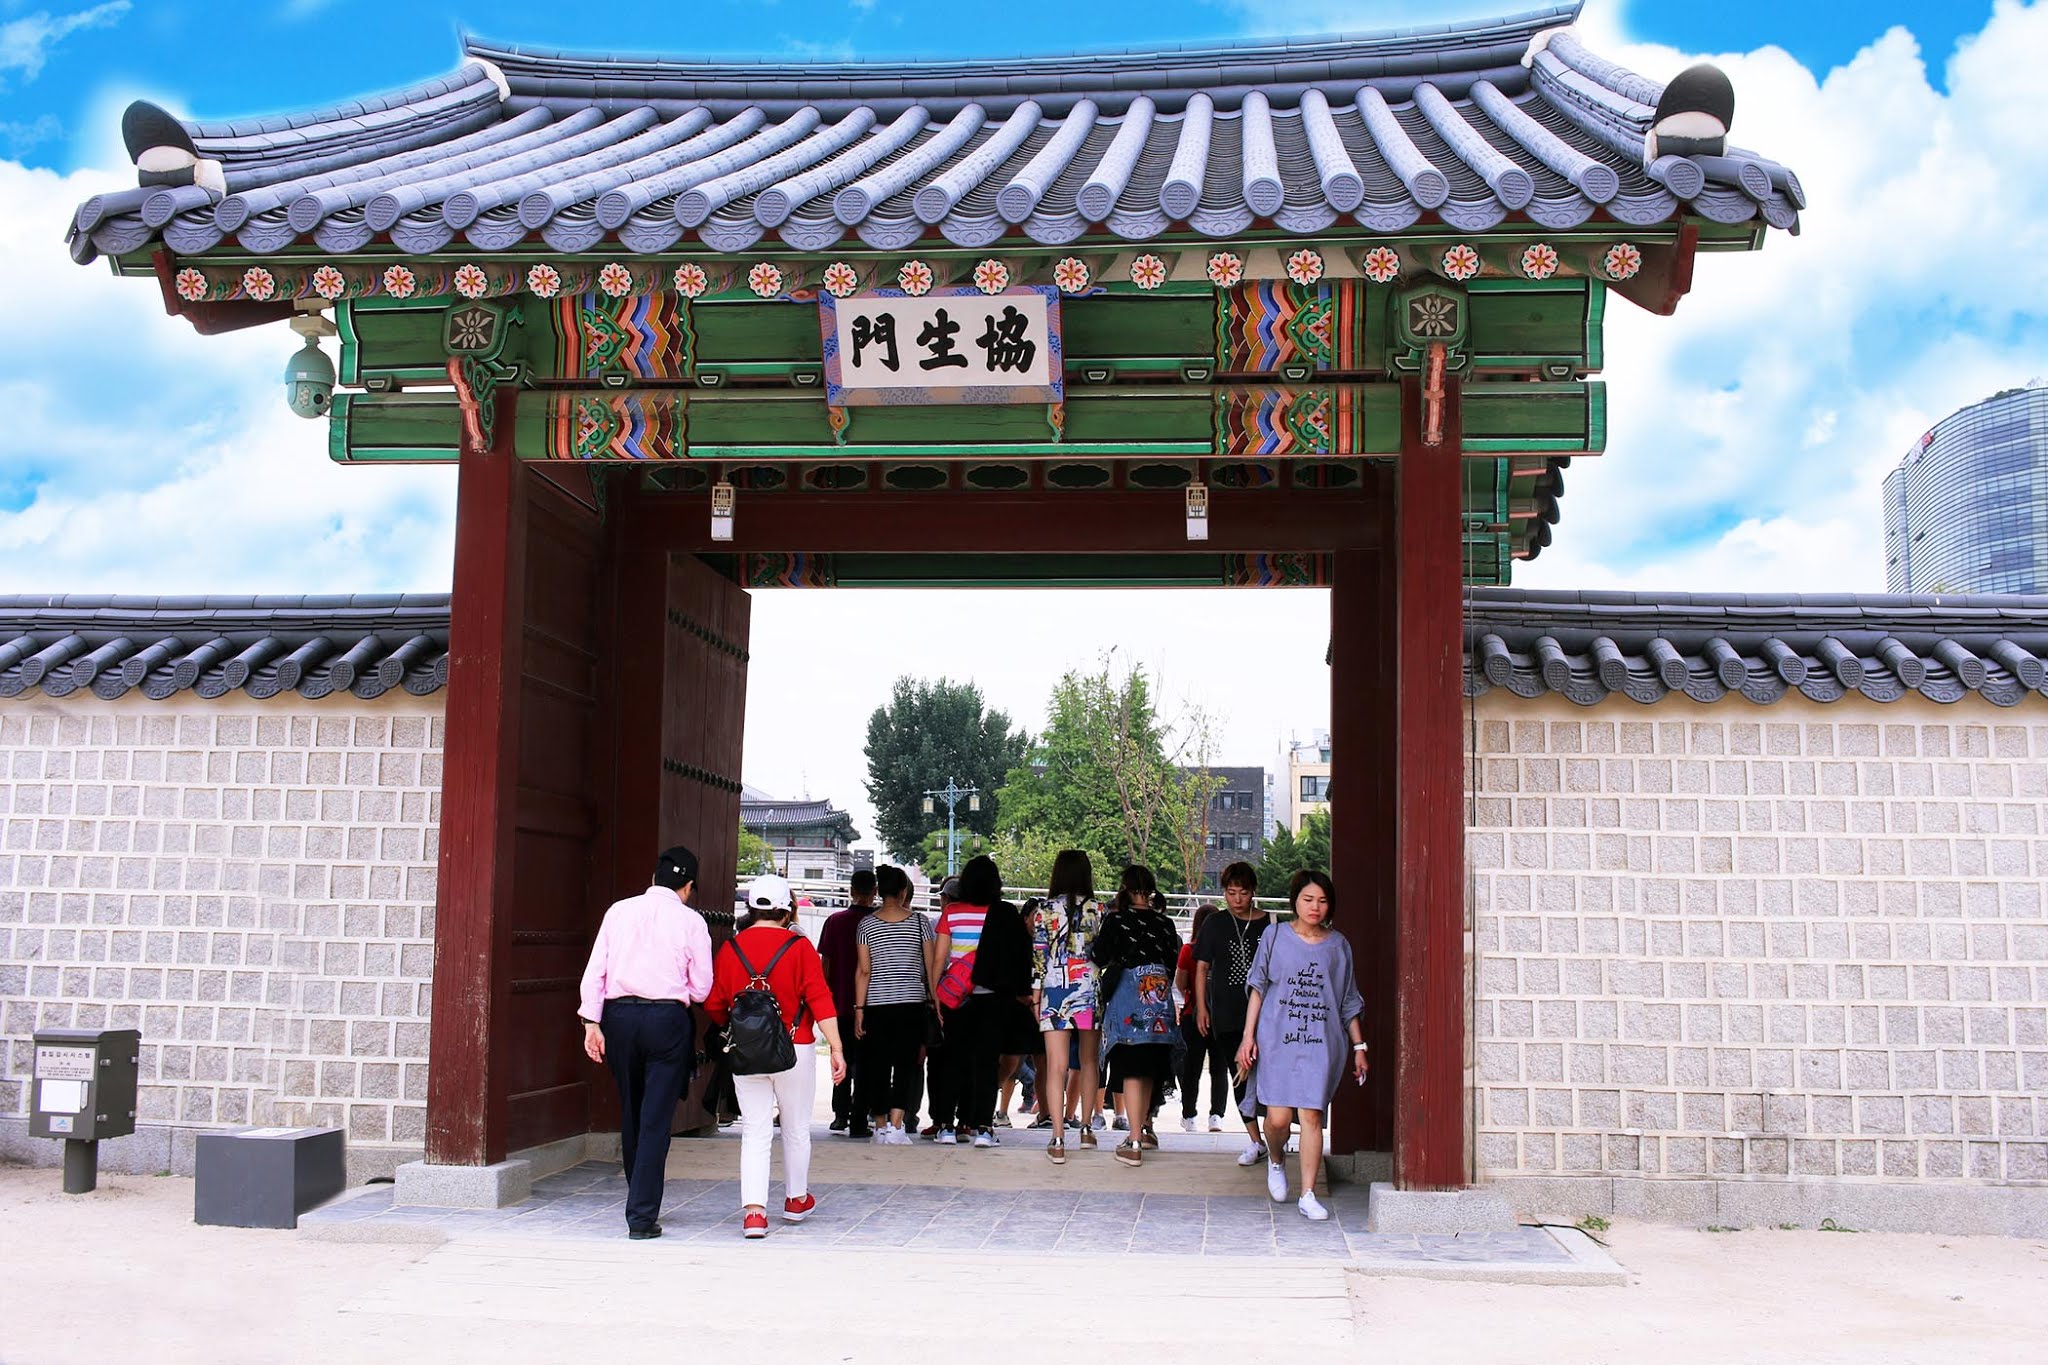 Gyeongbokgung Palace - Seoul Attractions & Things To Do